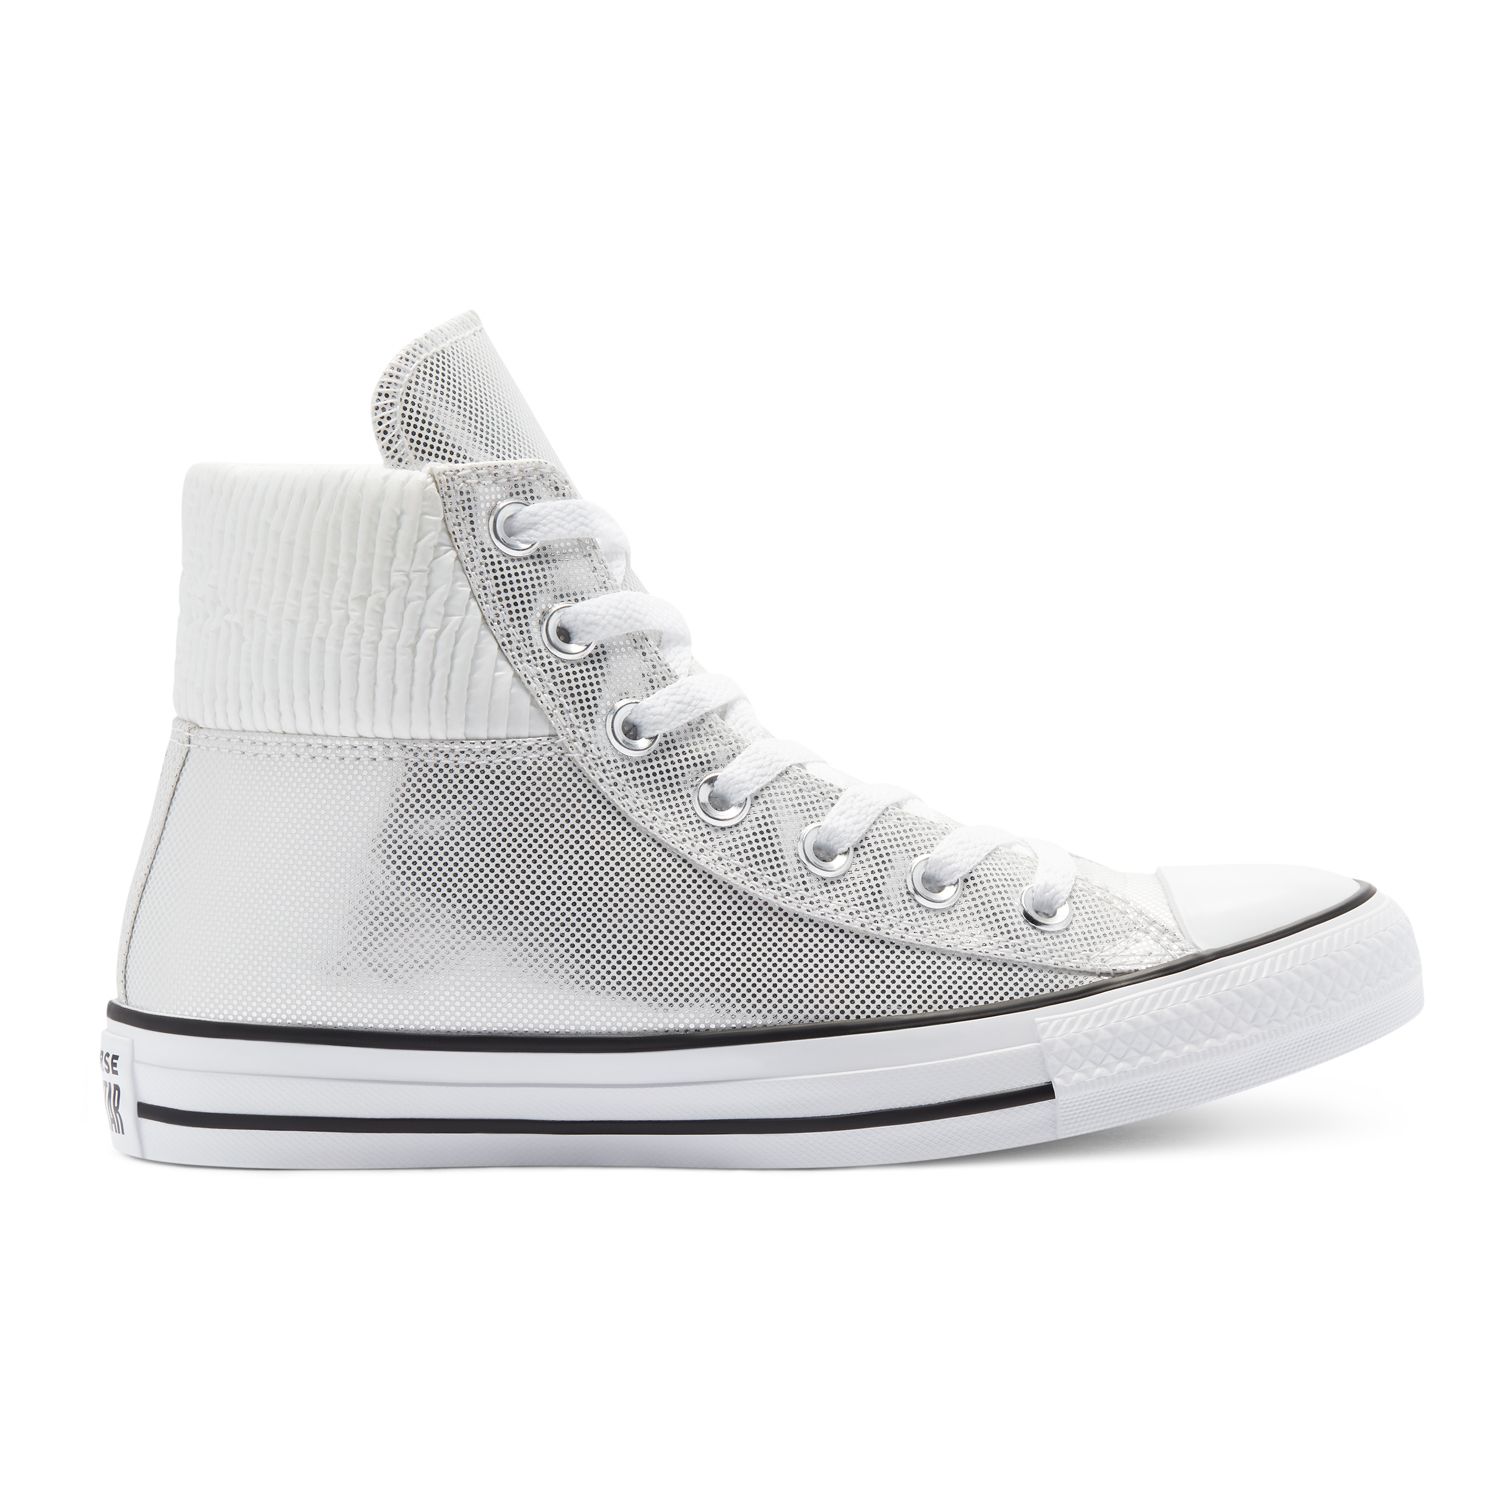 white and silver converse